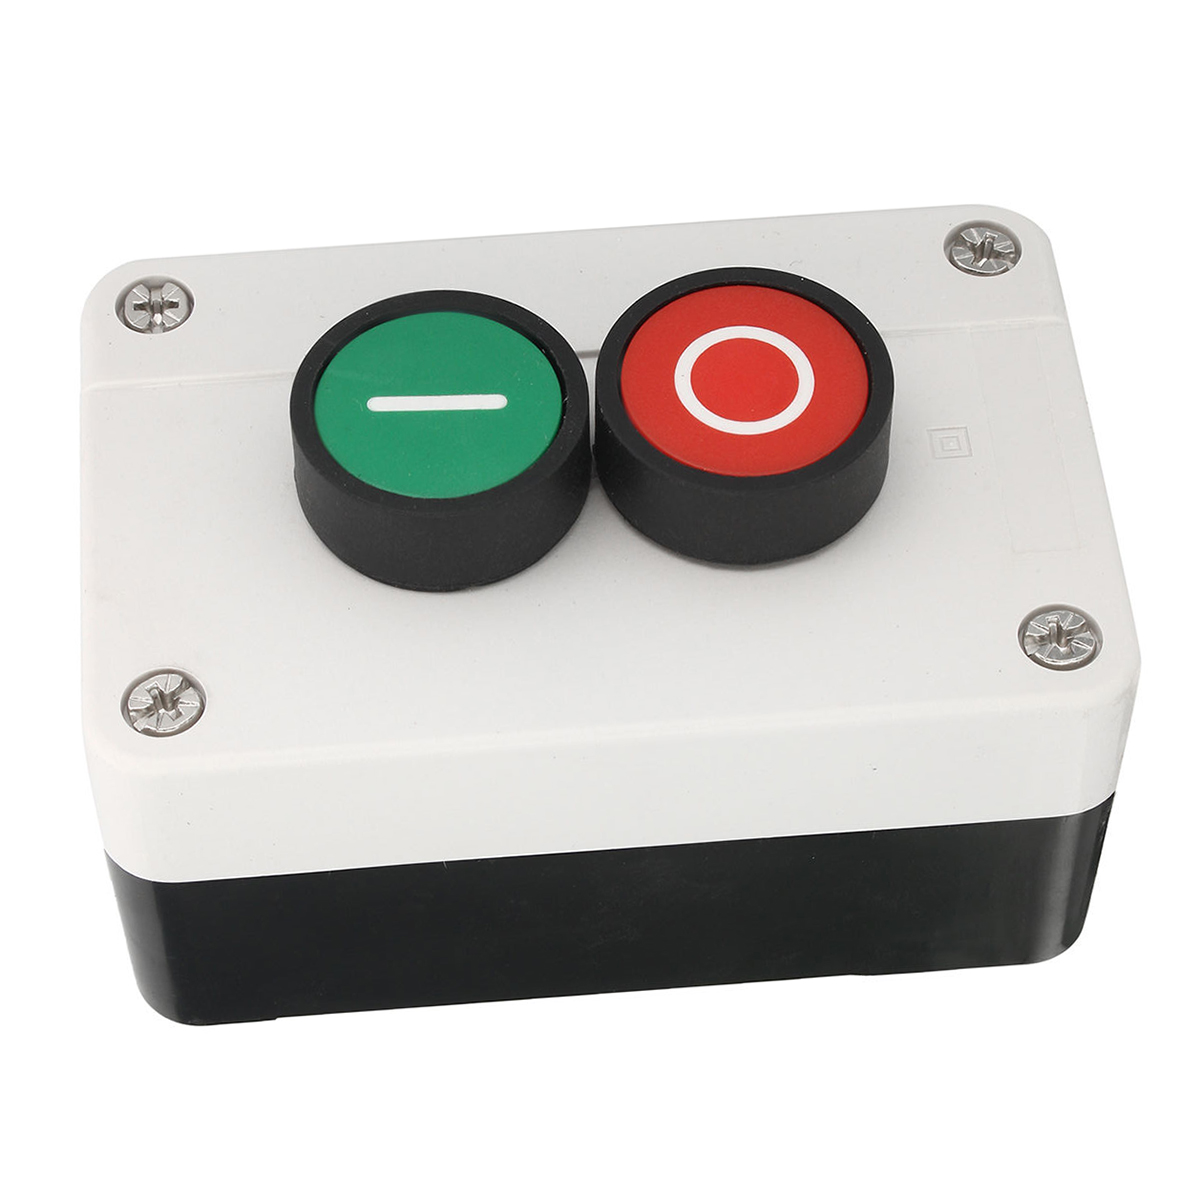 1pc Mayitr Push Button Station Switch Remote Start Stop Motor Solenoid IP55 Button Box for Indoor Outdoor Use